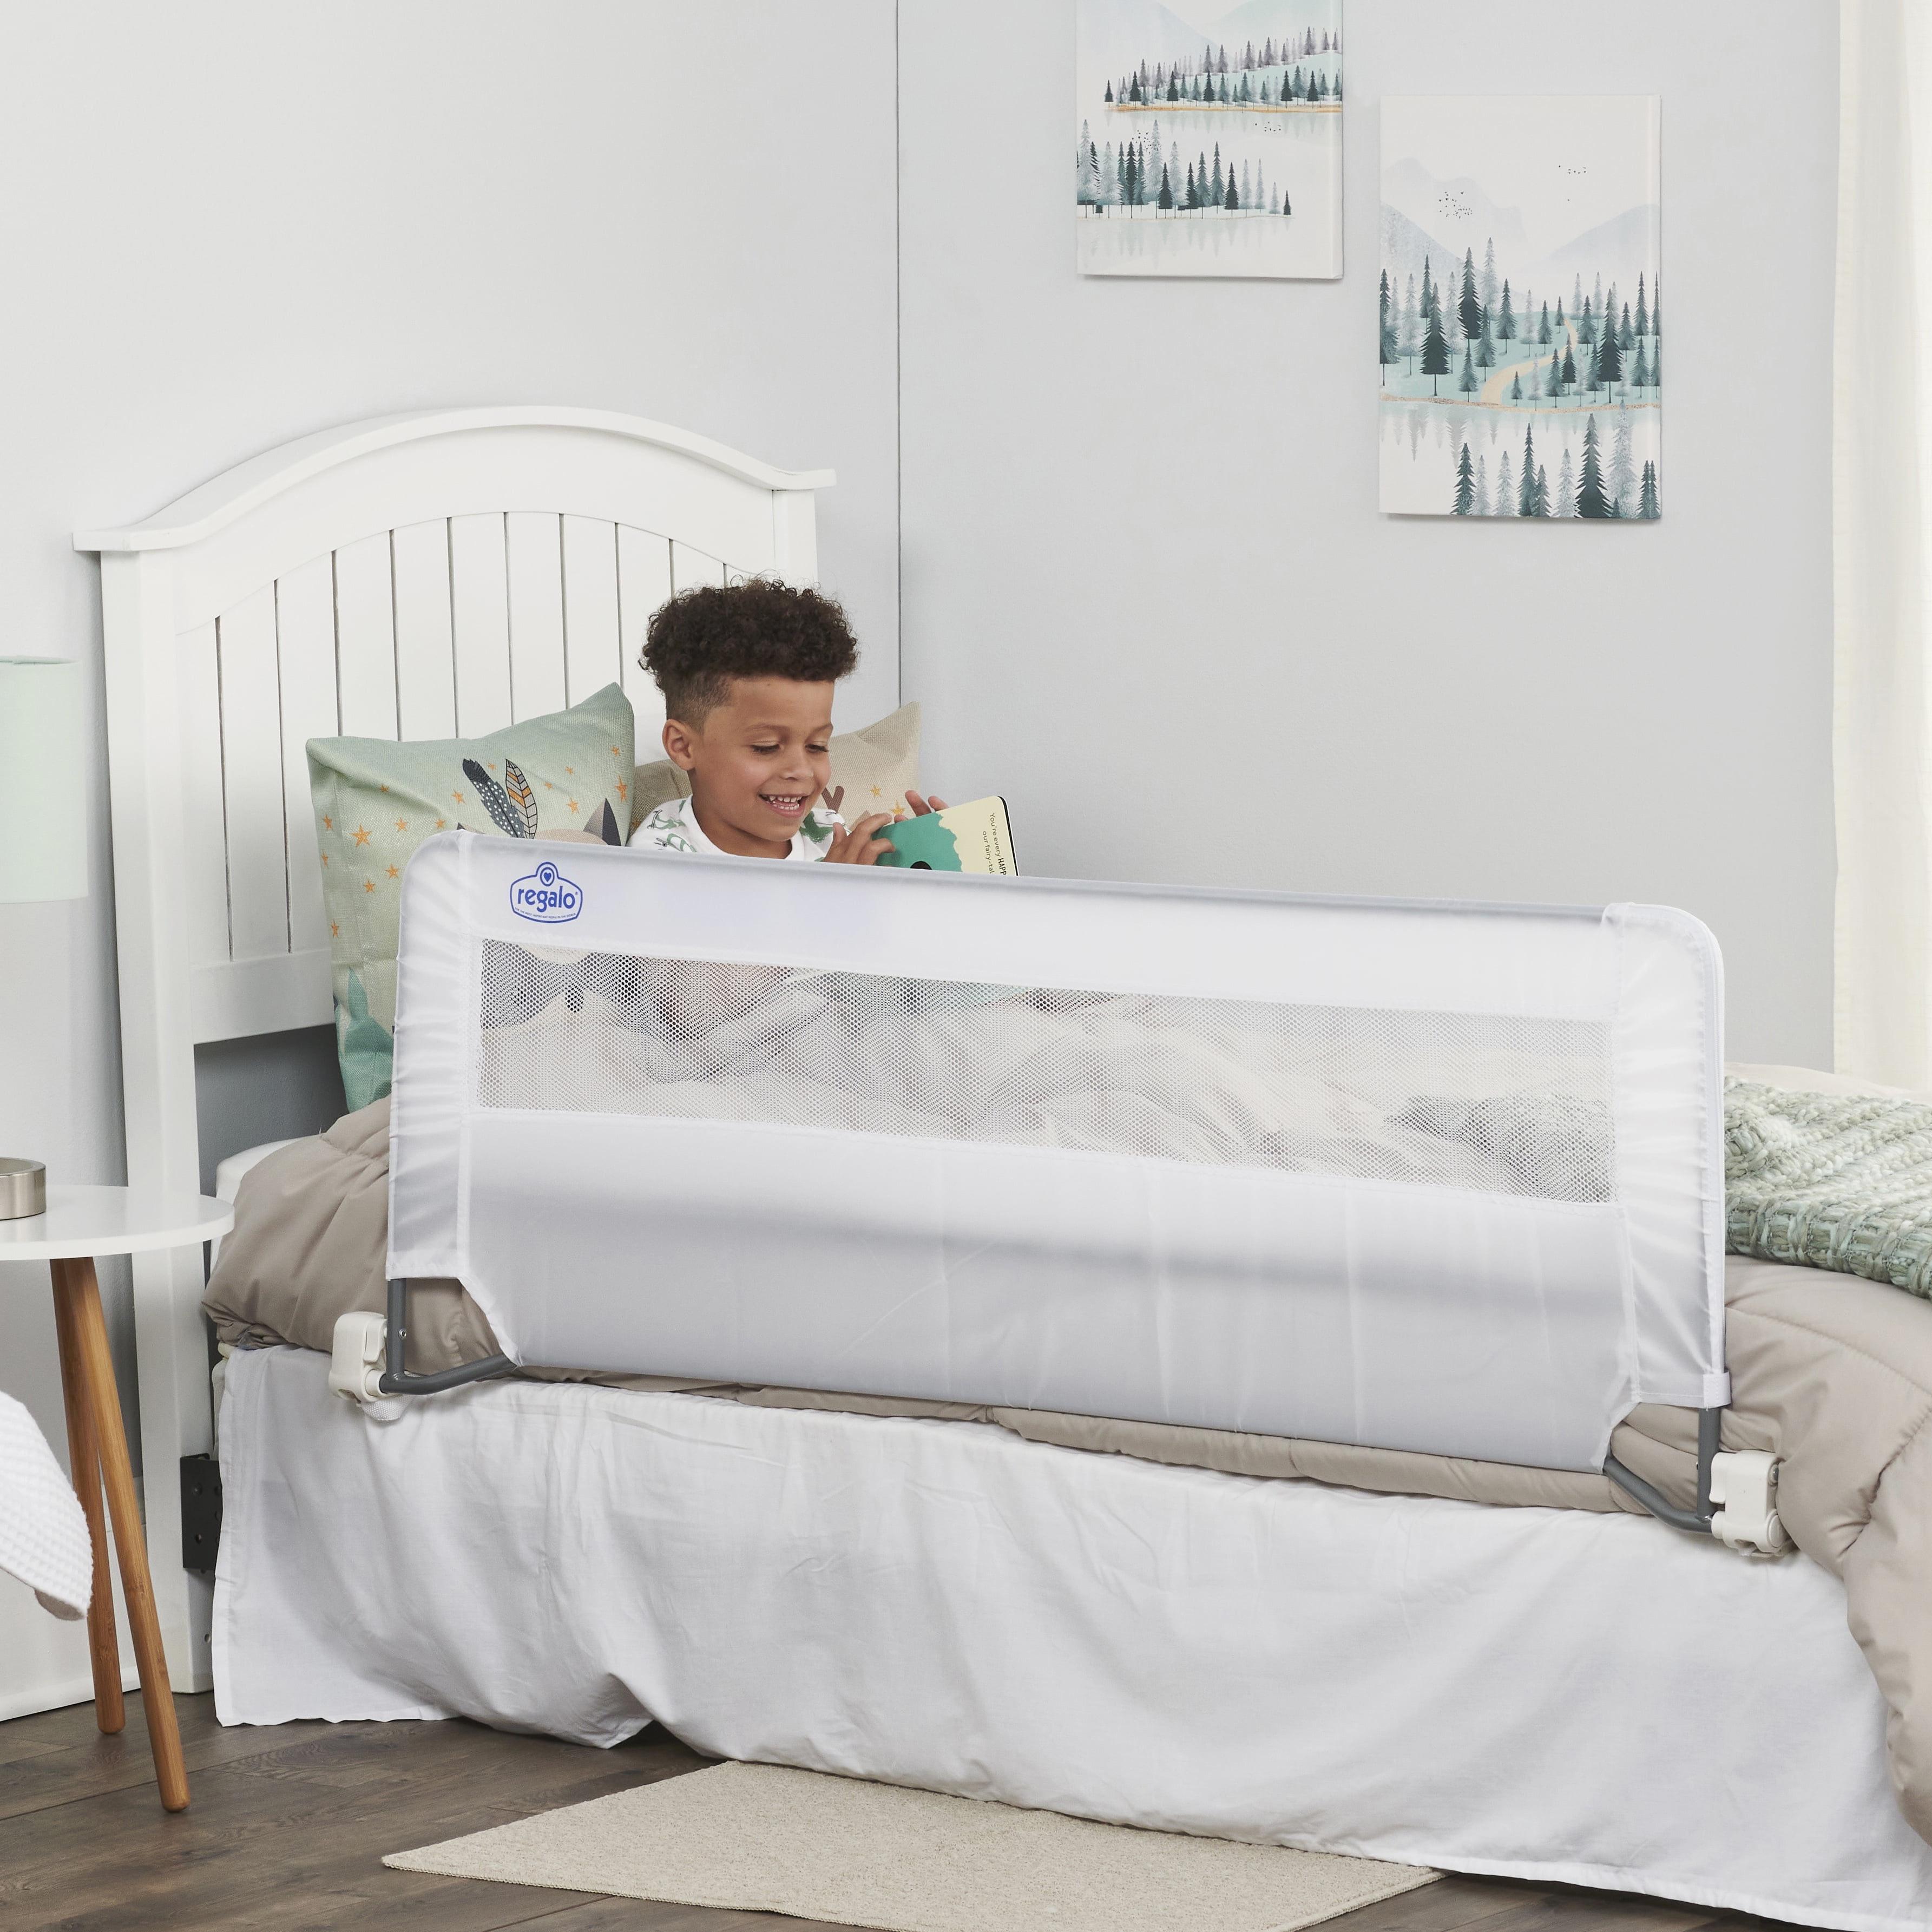 54 Inch Extra Long Bed Rail Guard, King Size Bed Guard